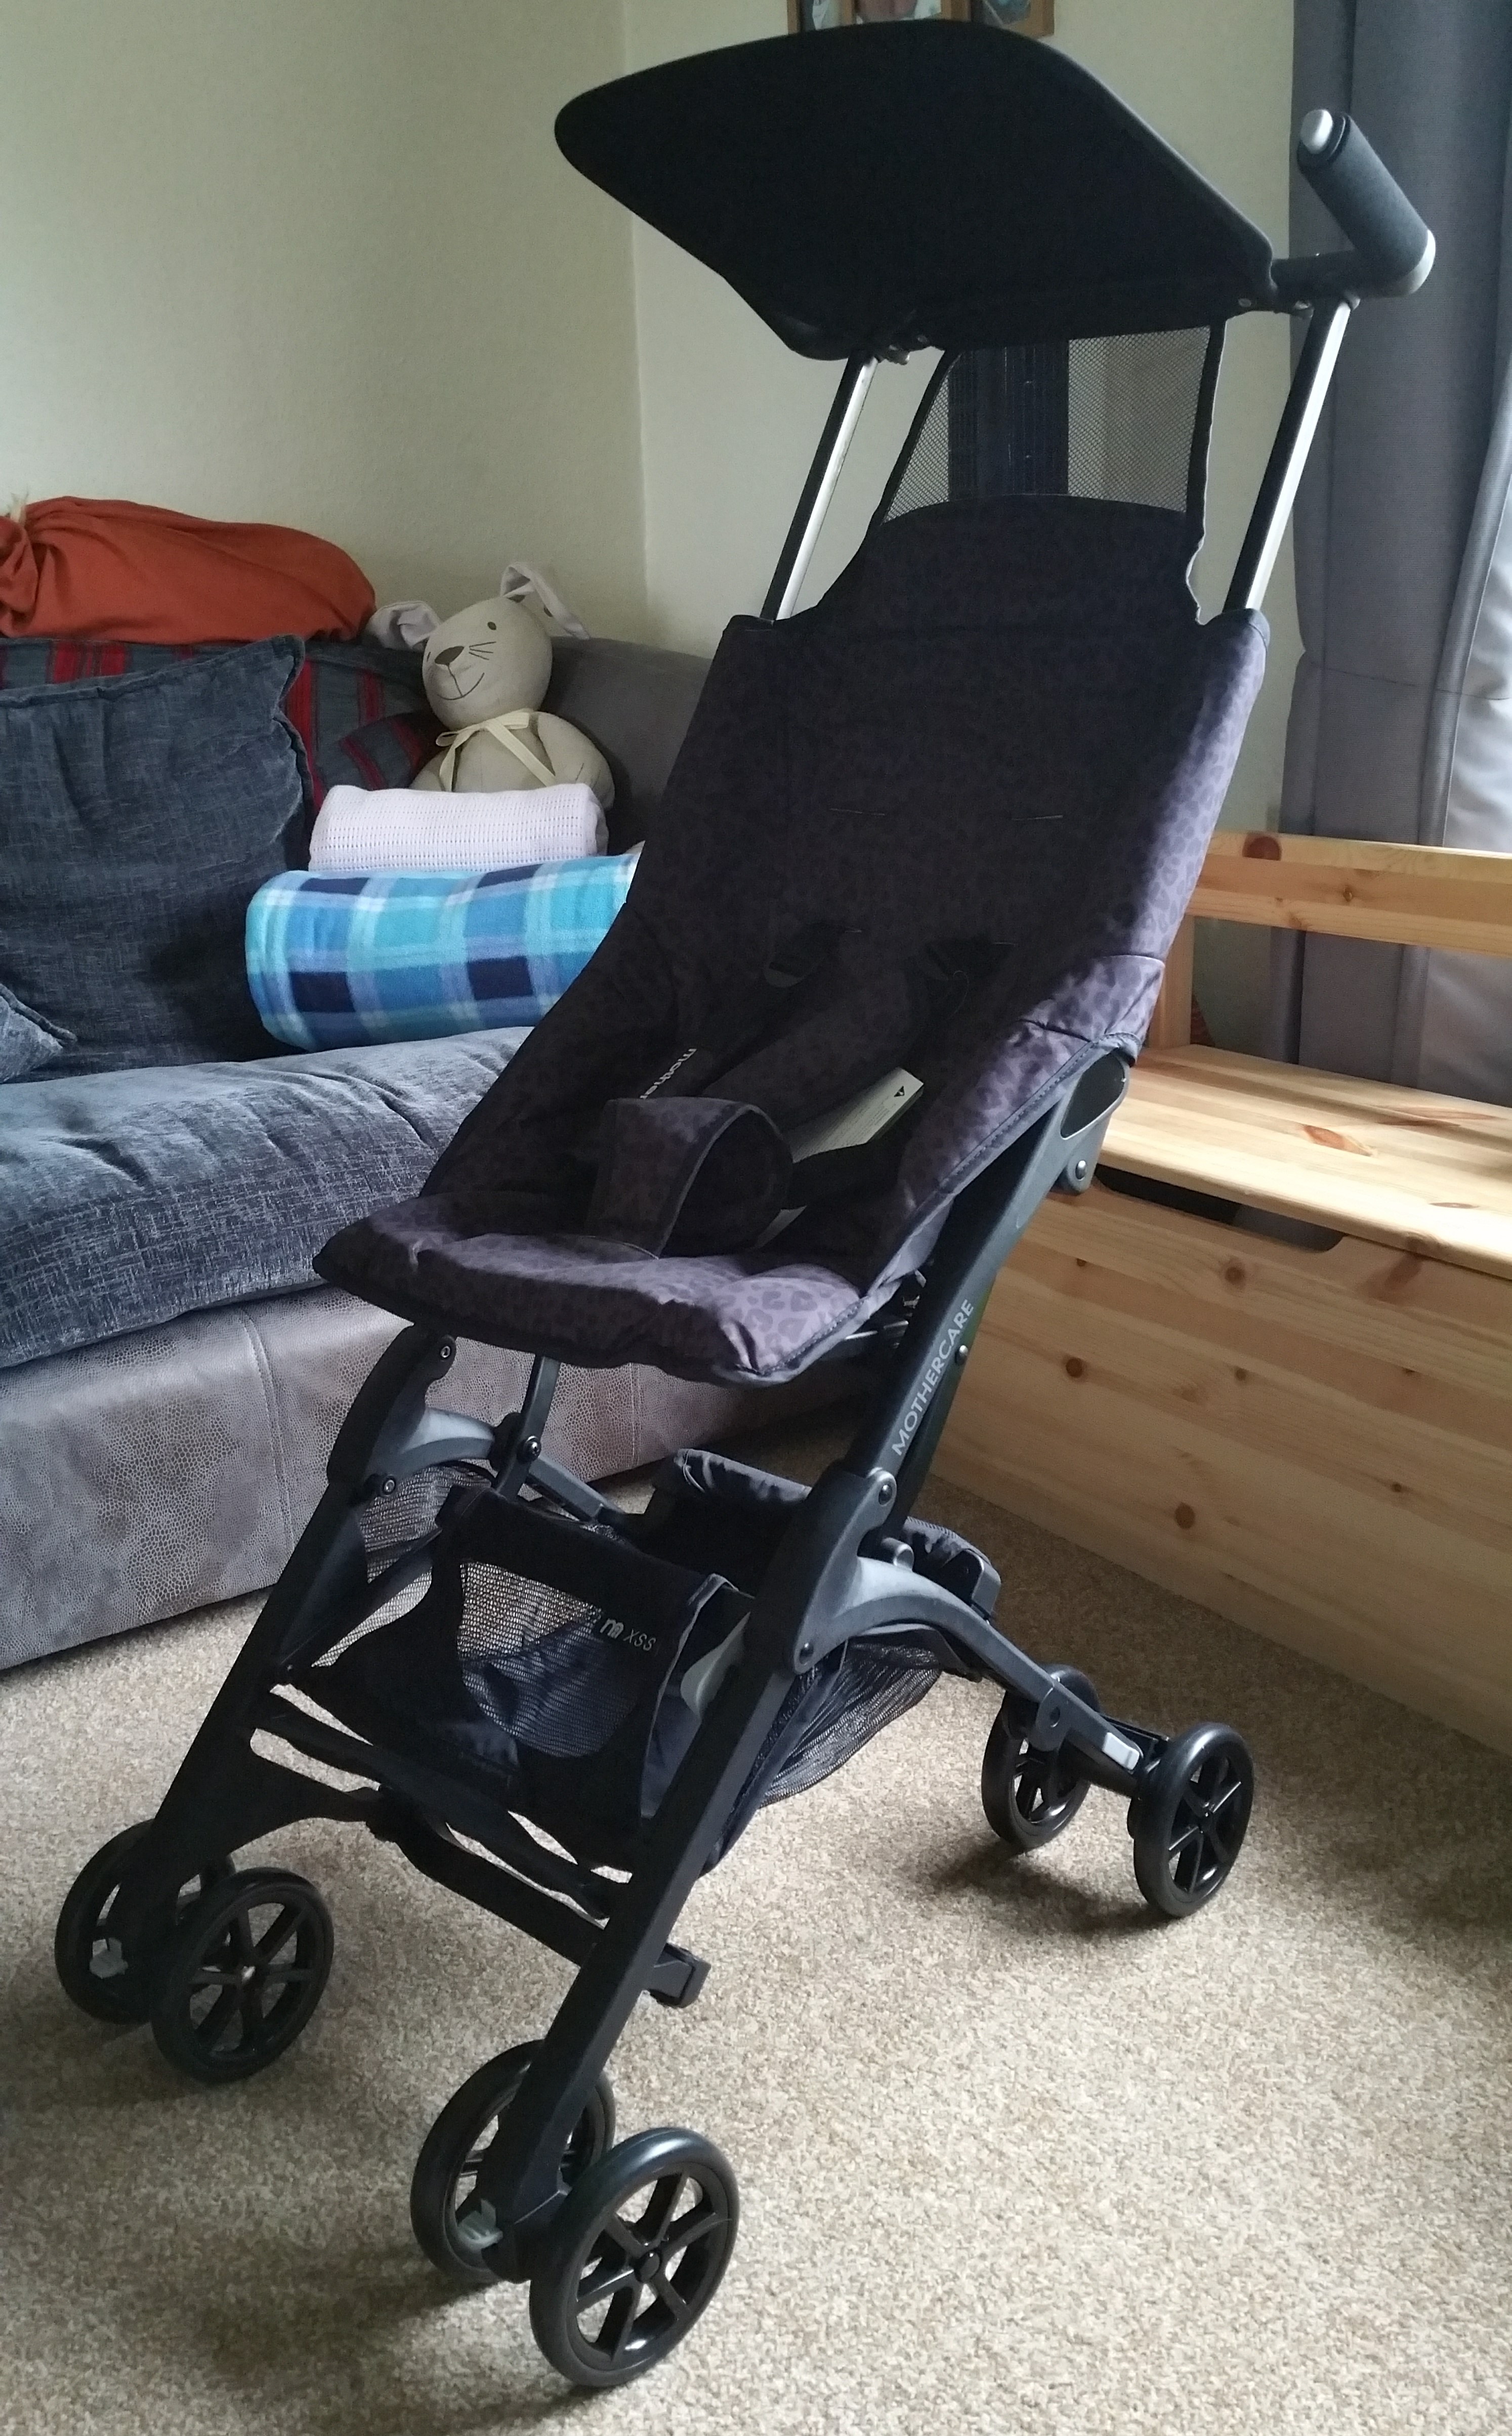 mothercare roll stroller